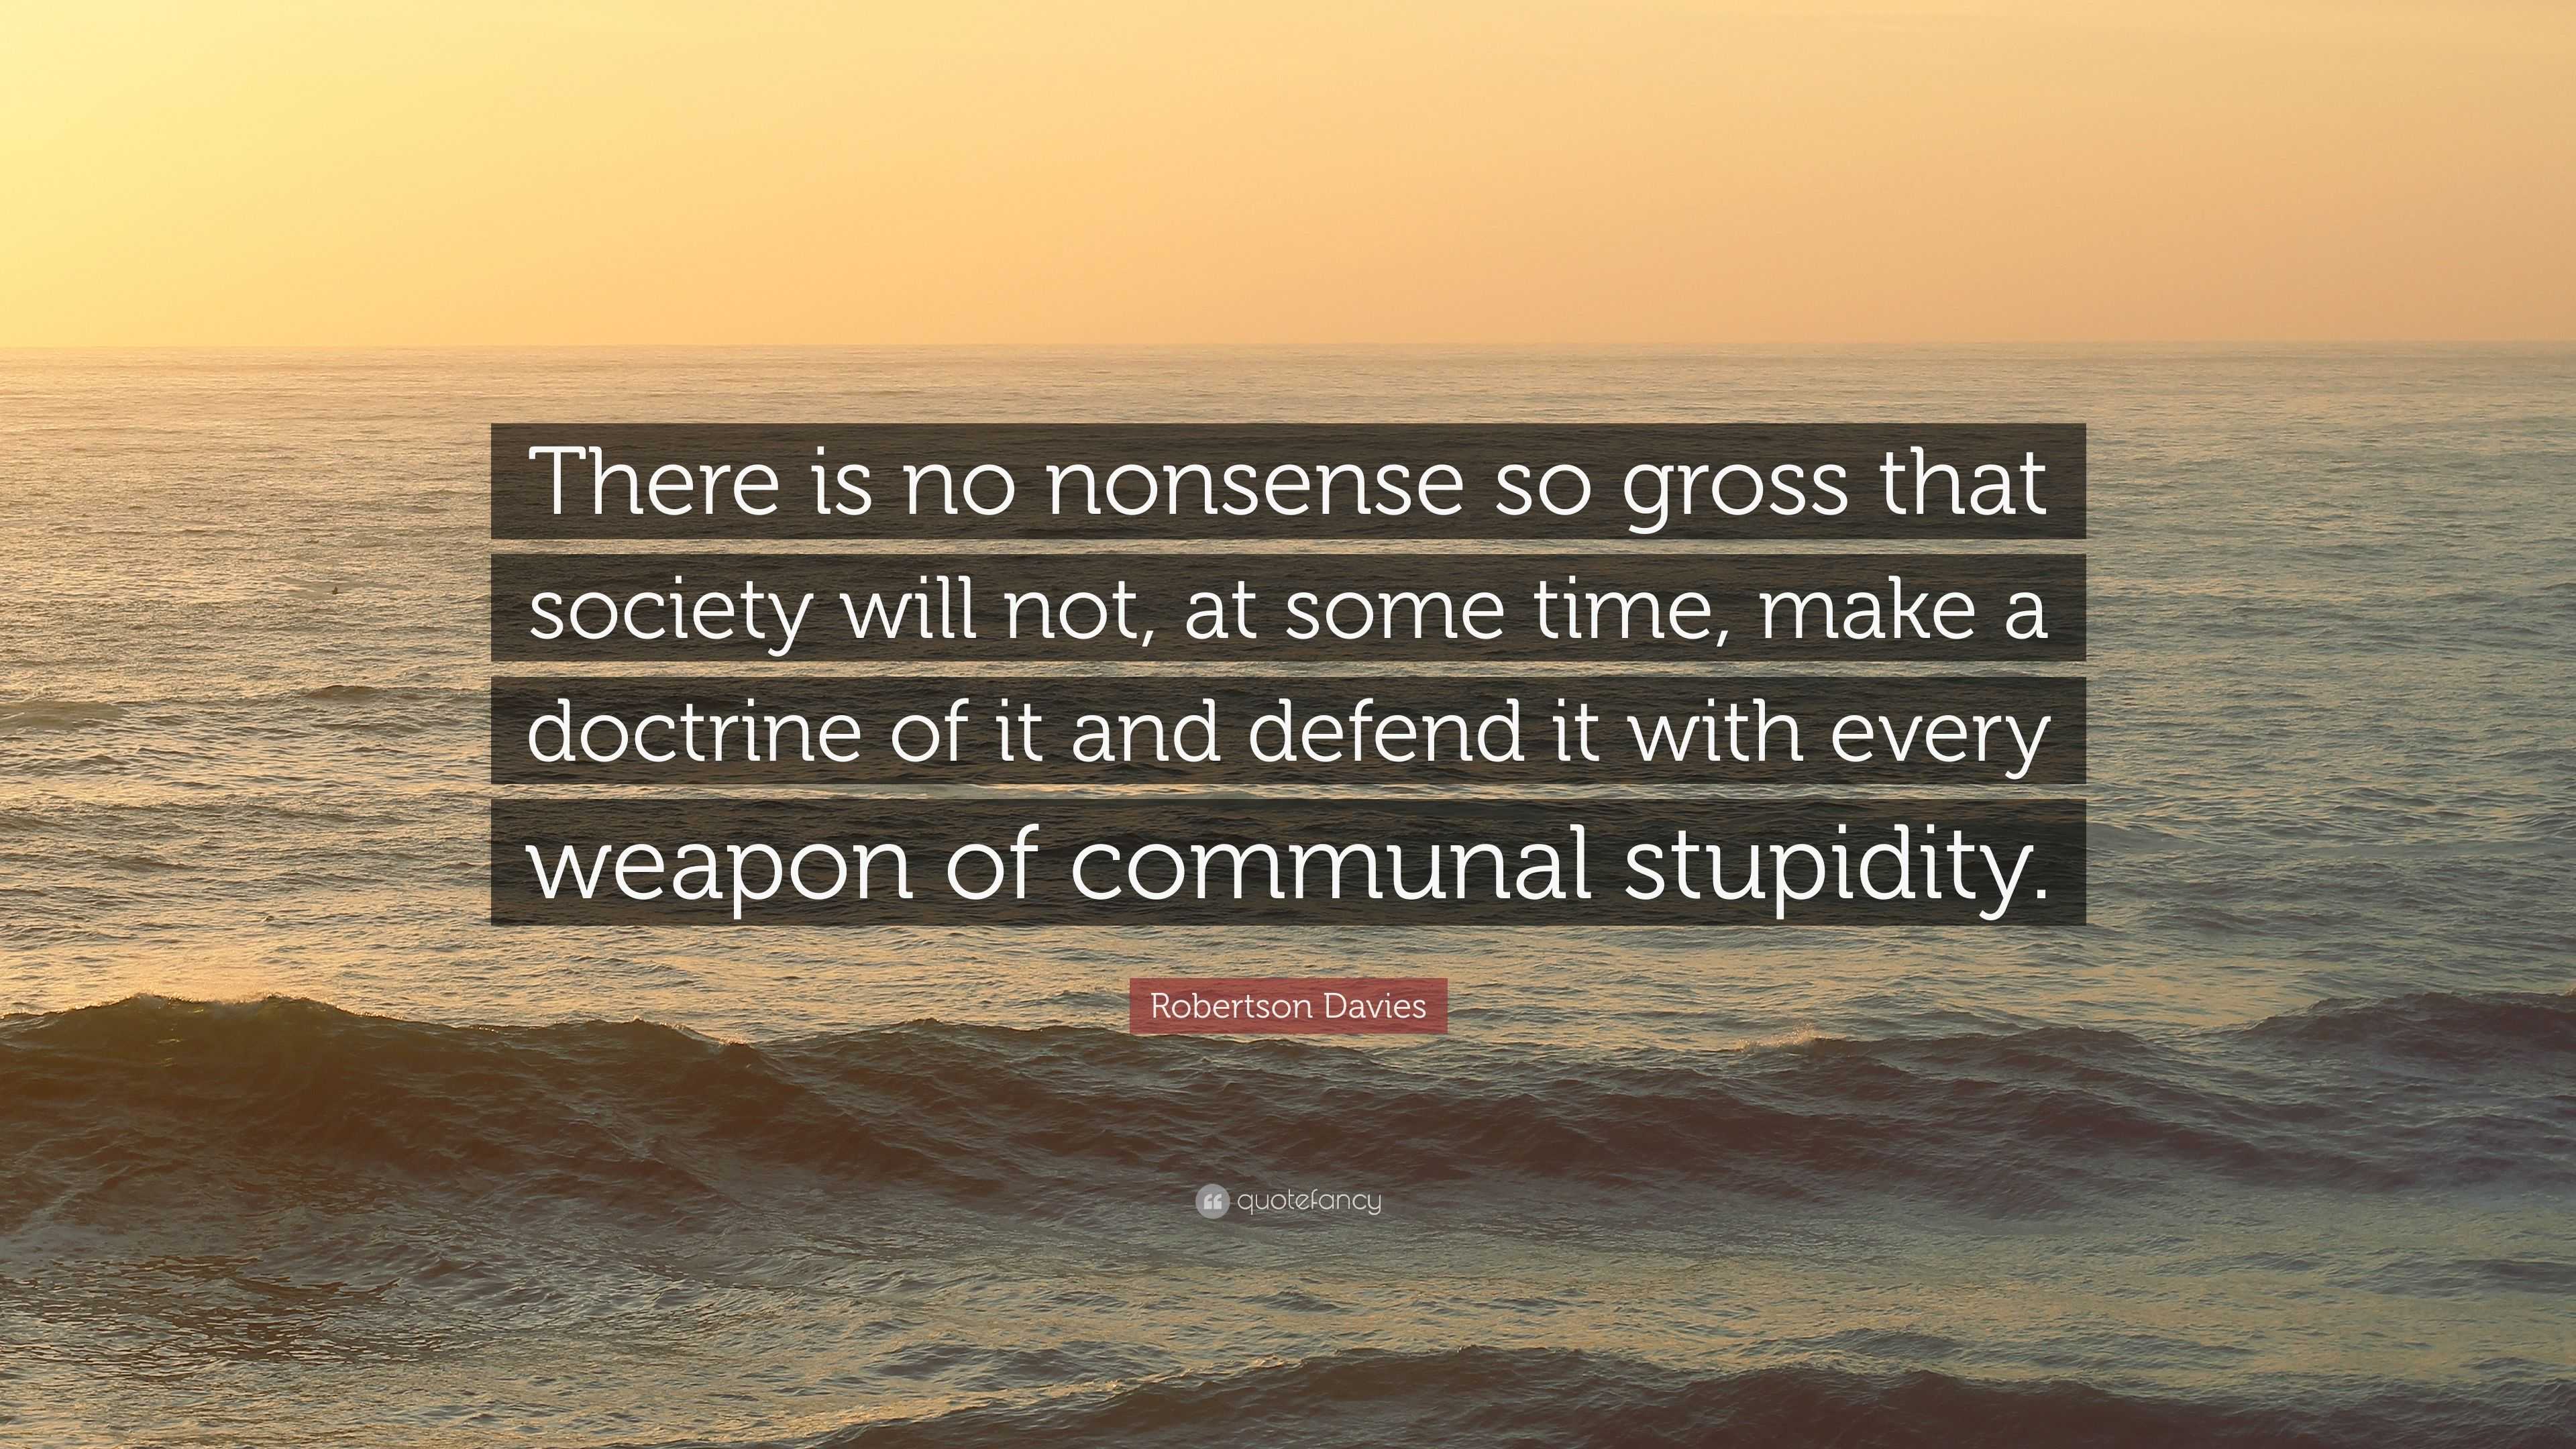 There is no nonsense so arrant that it - Quote